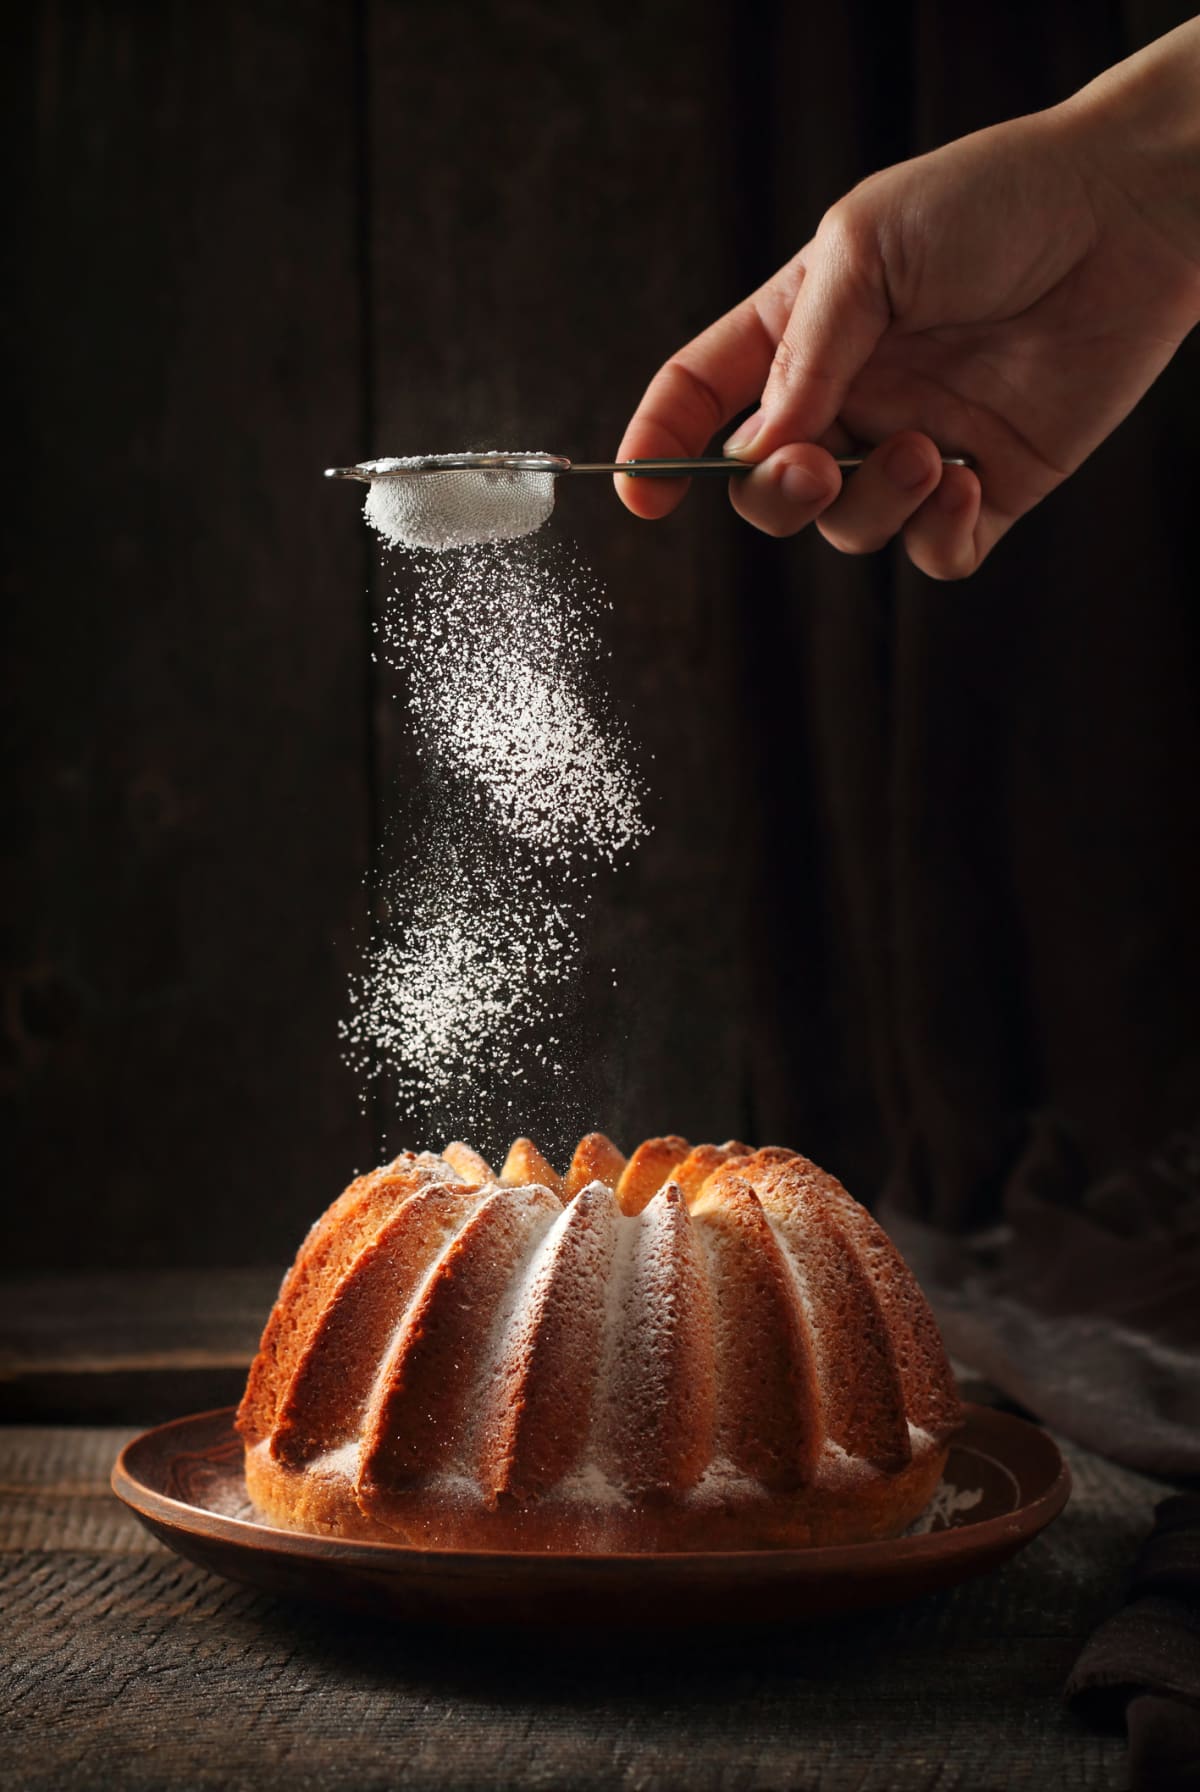 sprinkling of orange cake with powdered sugar, dark wood background, light from one flash and one reflector